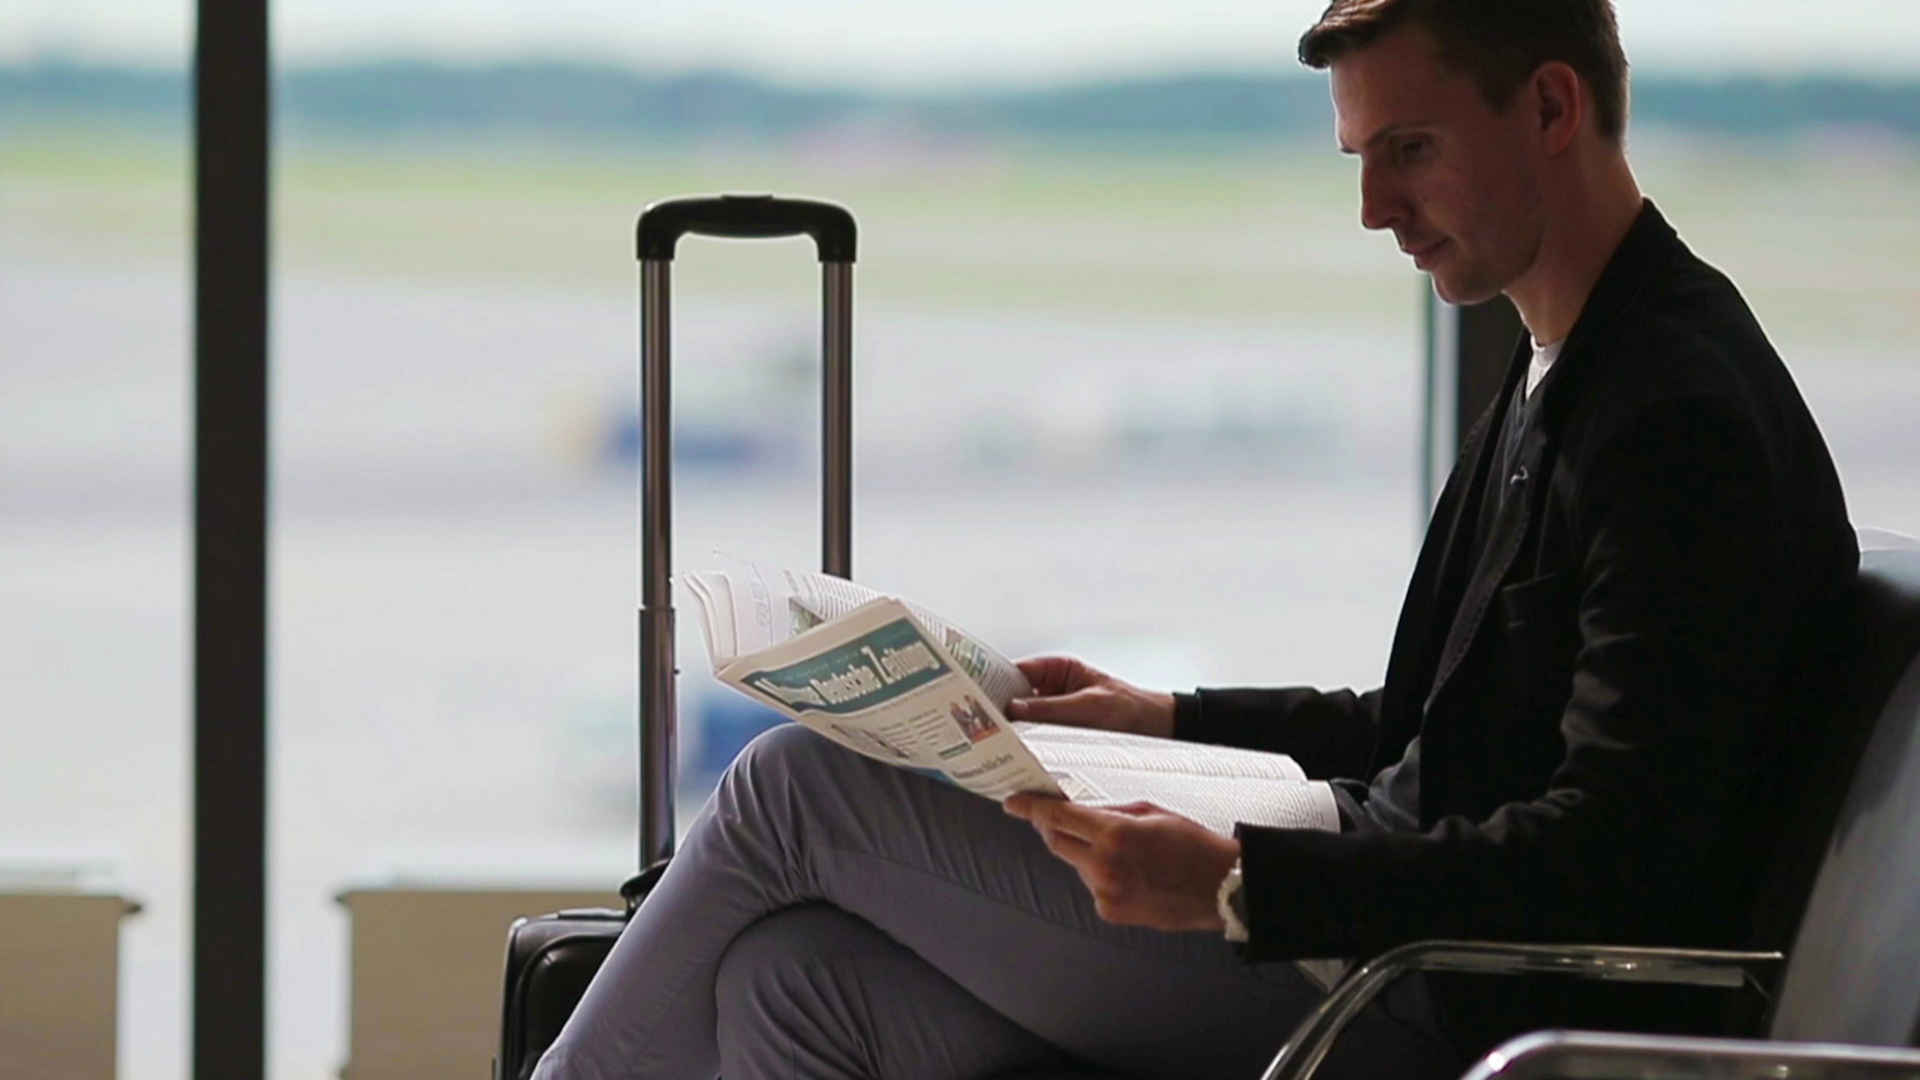 Man sitting at the airport and reading newspaper